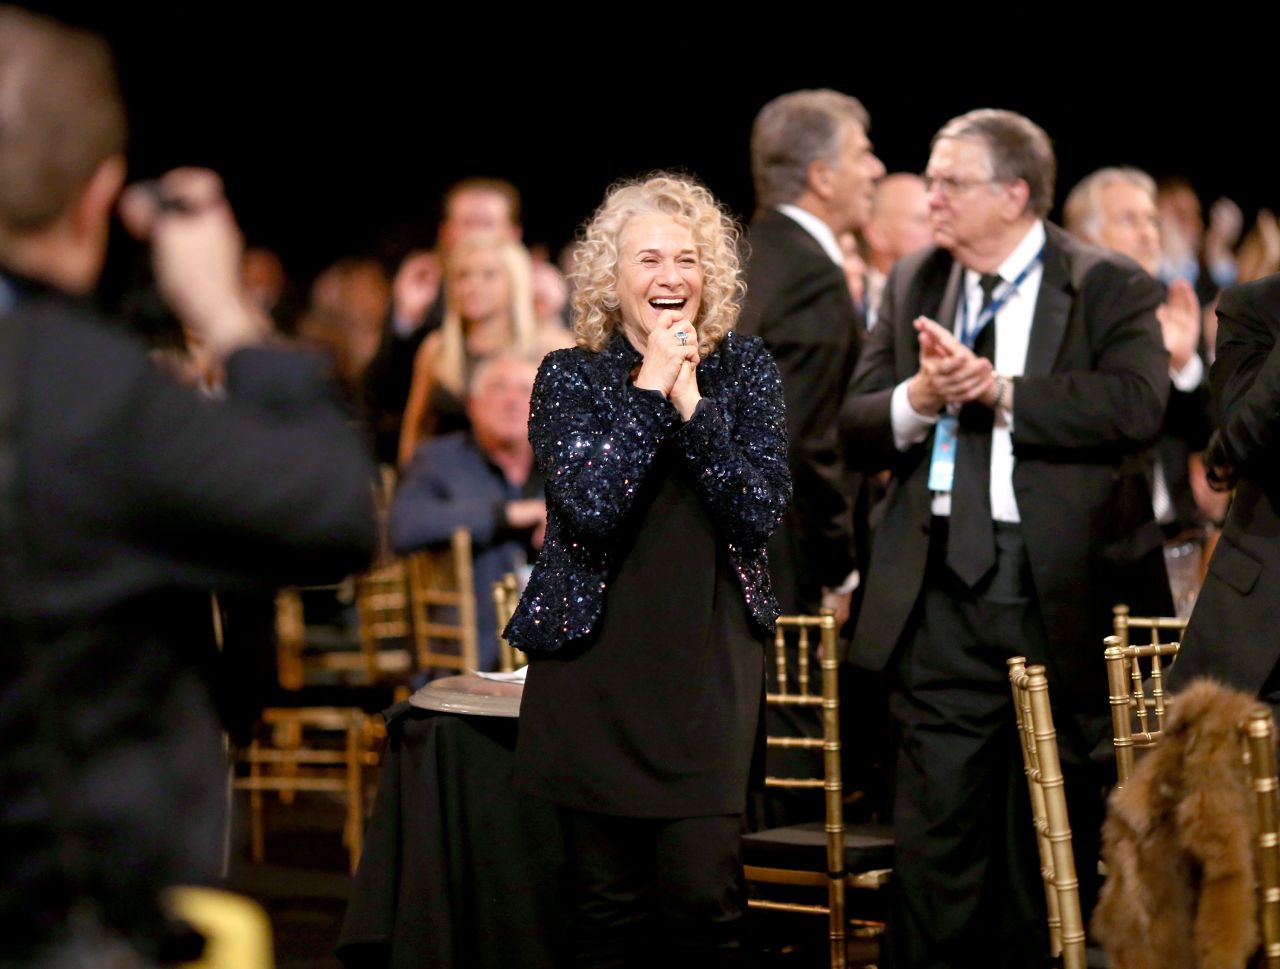 King is honored as the 2014 MusiCares Person Of The Year at the Los Angeles Convention Center. "Her contributions as a songwriter and performer have truly changed the landscape of pop music, and her philanthropy speaks volumes about her generosity and personal passions," said Neil Portnow, president and CEO of the <a href="https://www.musicares.org/musicares/news/carole-king-named-2014-musicares-person-of-the-year" target="_blank" target="_blank">MusiCares Foundation. </a>